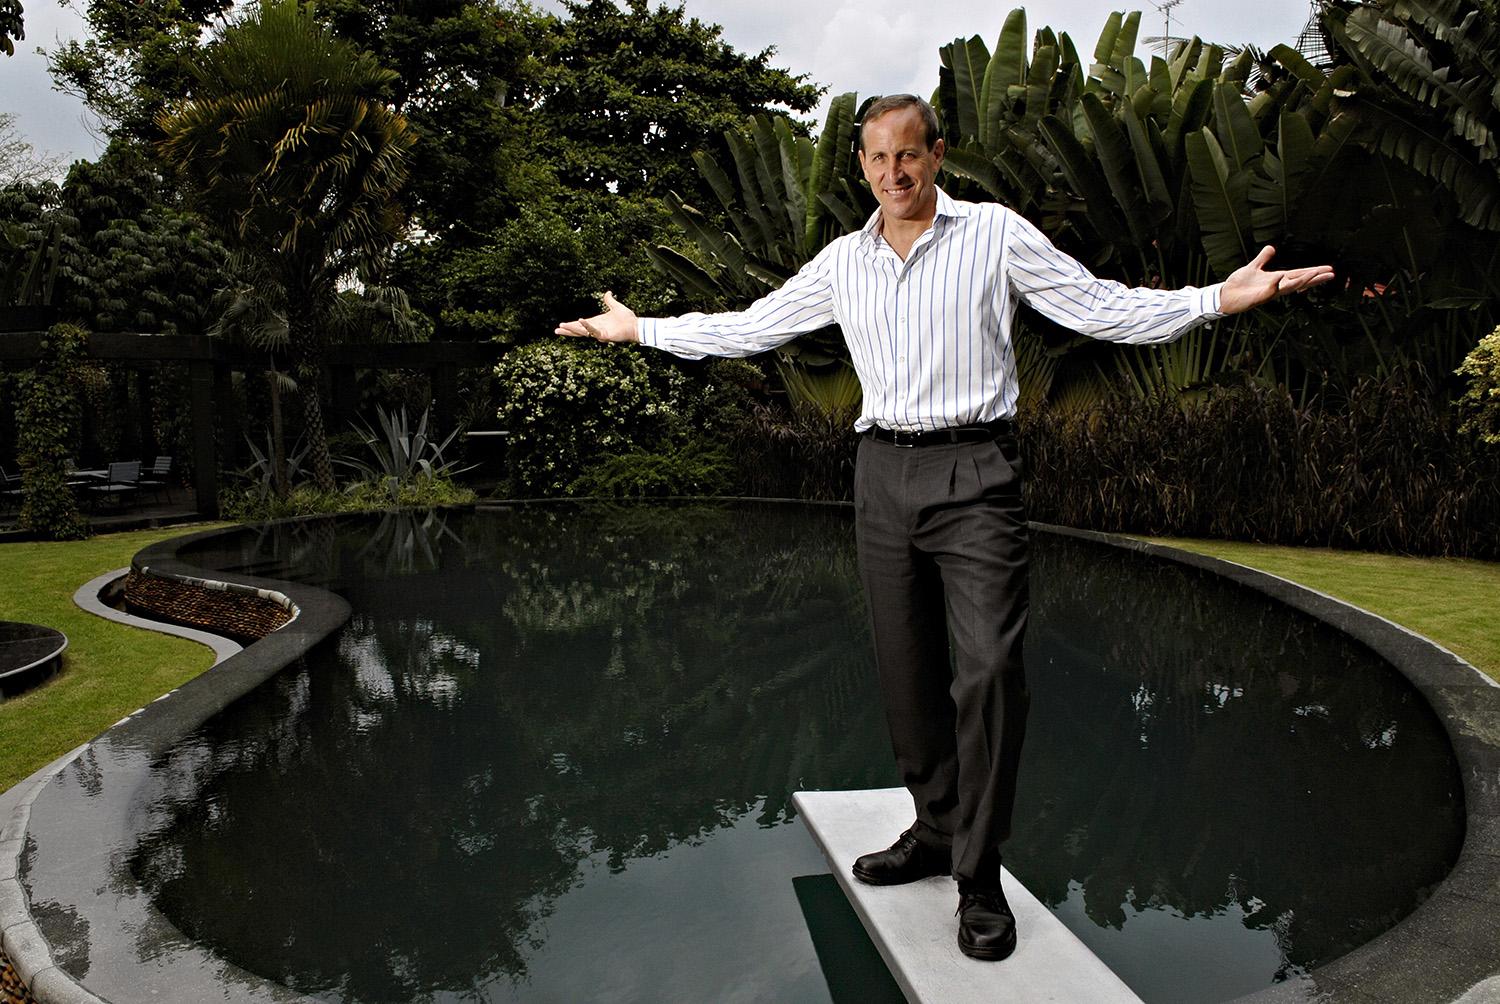 Bill Bensley, a landscape architect and resort planner, poses on a swimming pool diving board in the gardens of his Bangkok headquarters, Bensley Design Studios.